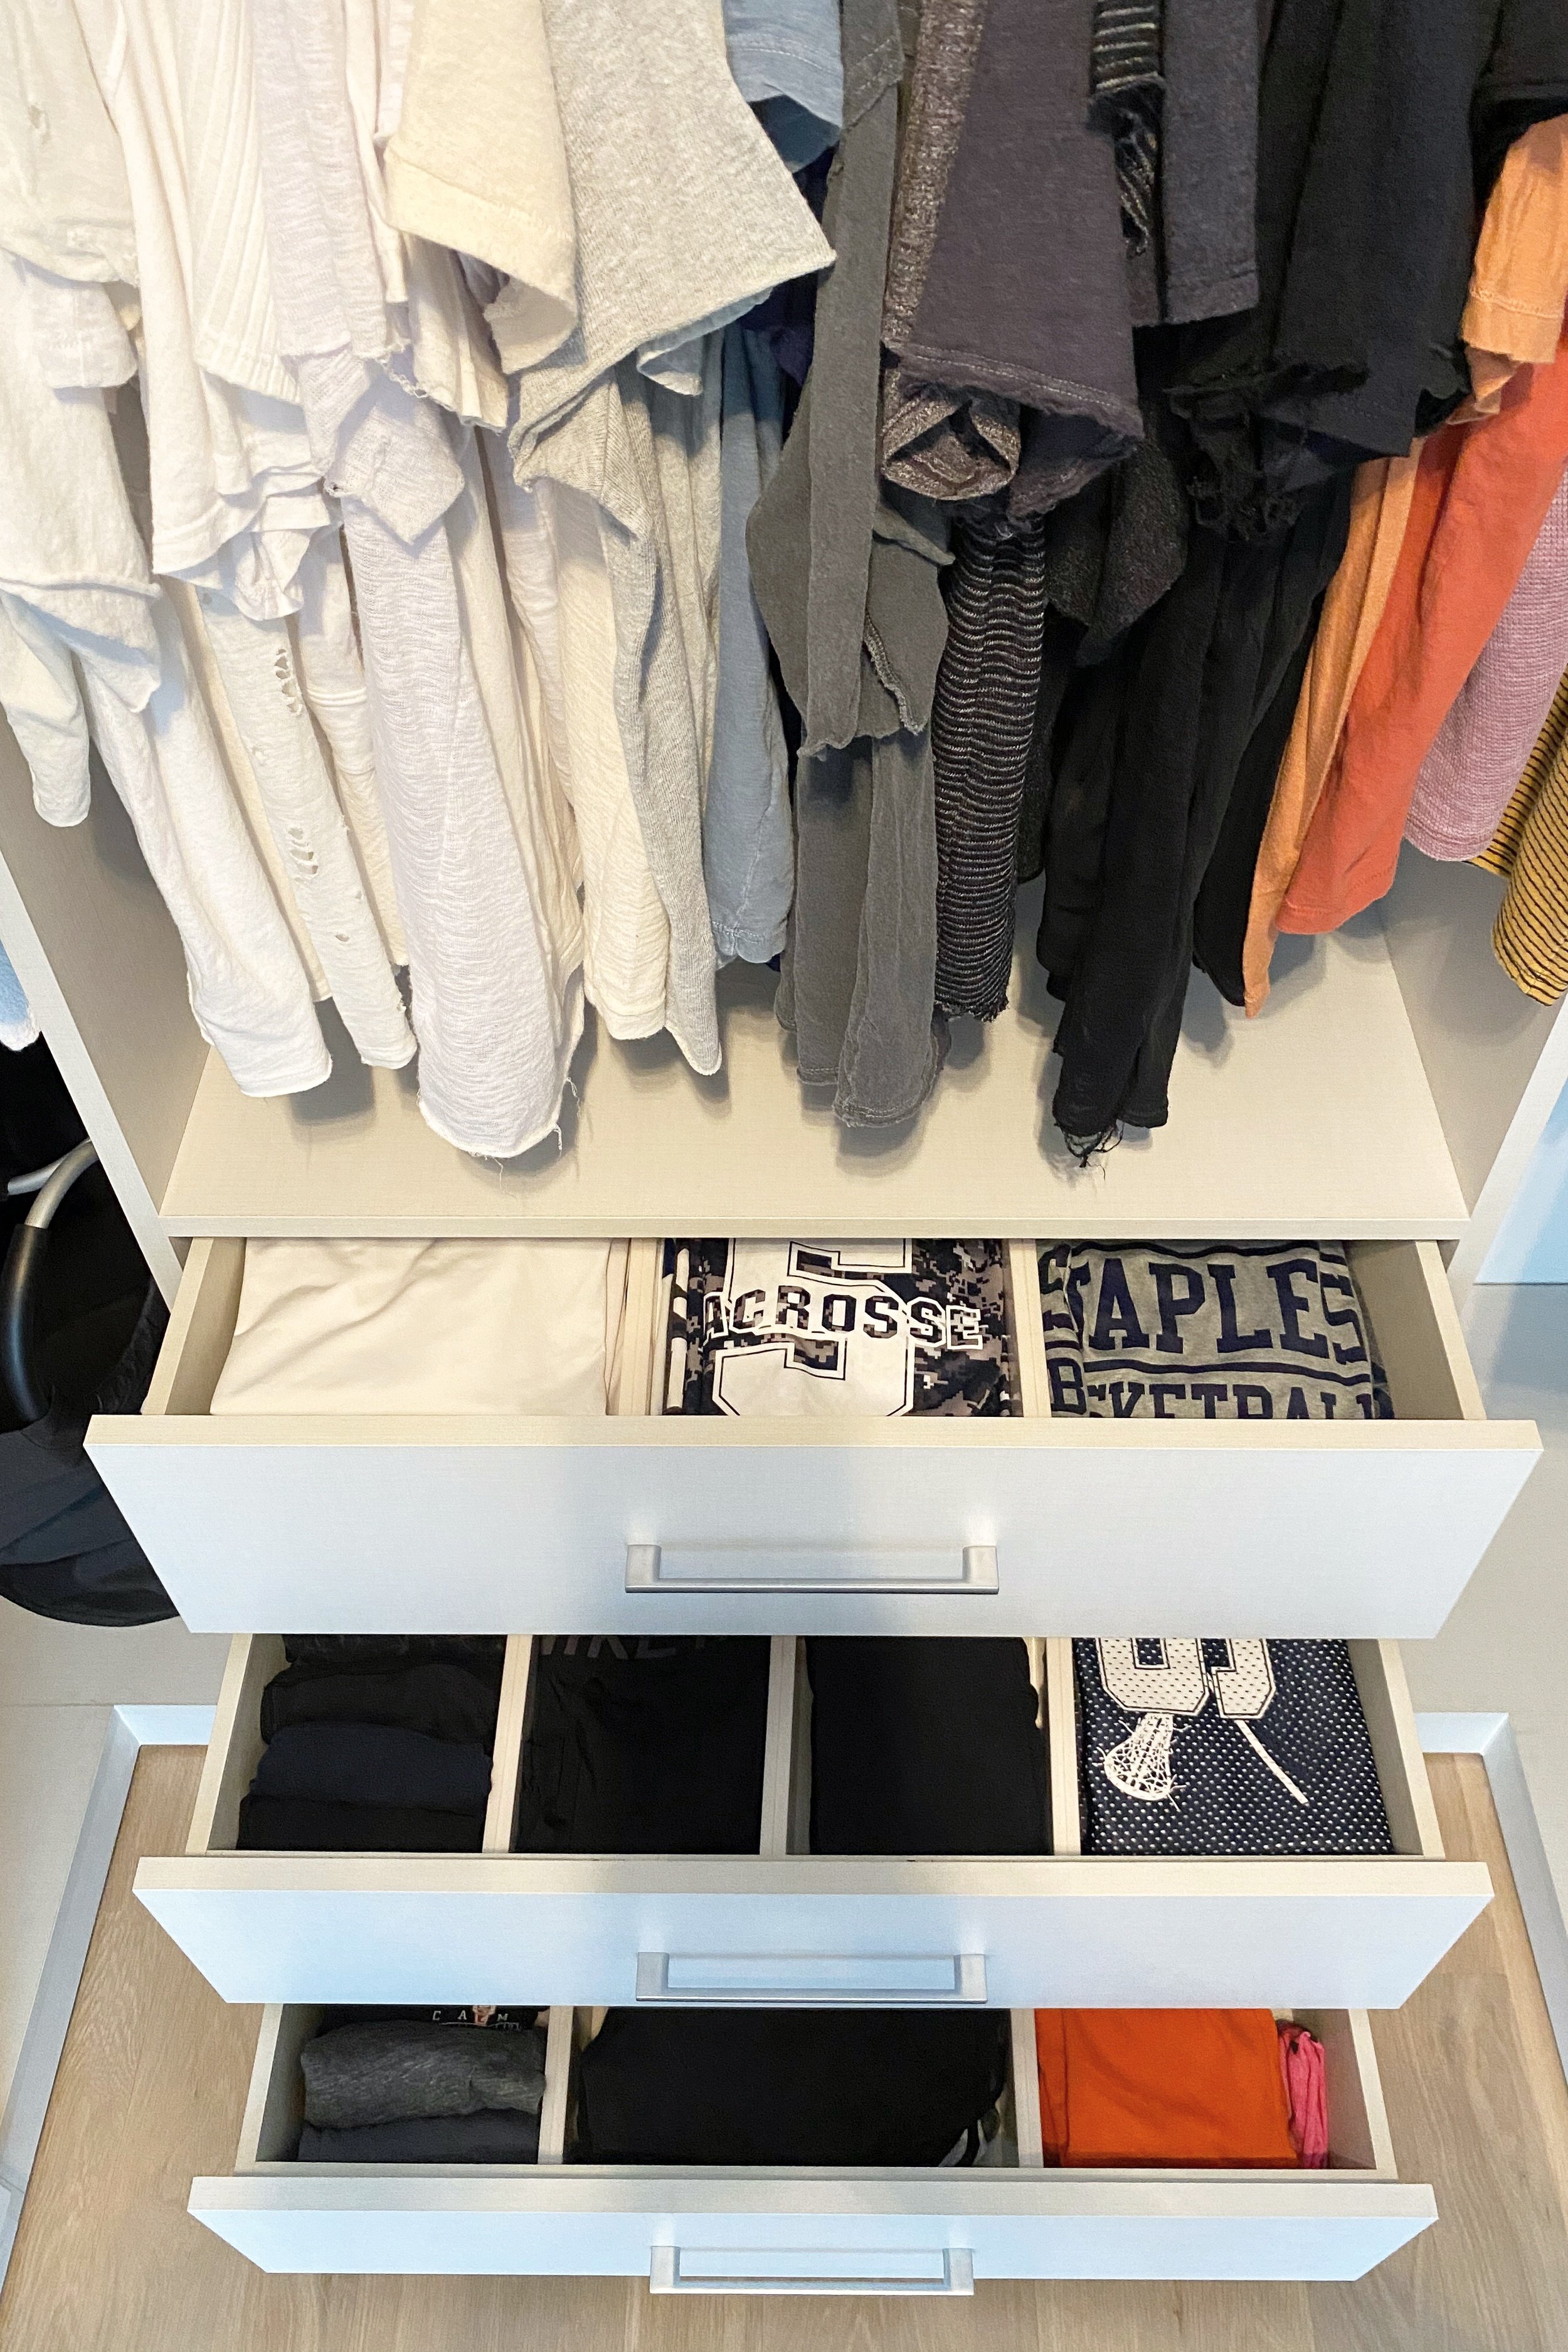 File Fold Clothing in Drawers